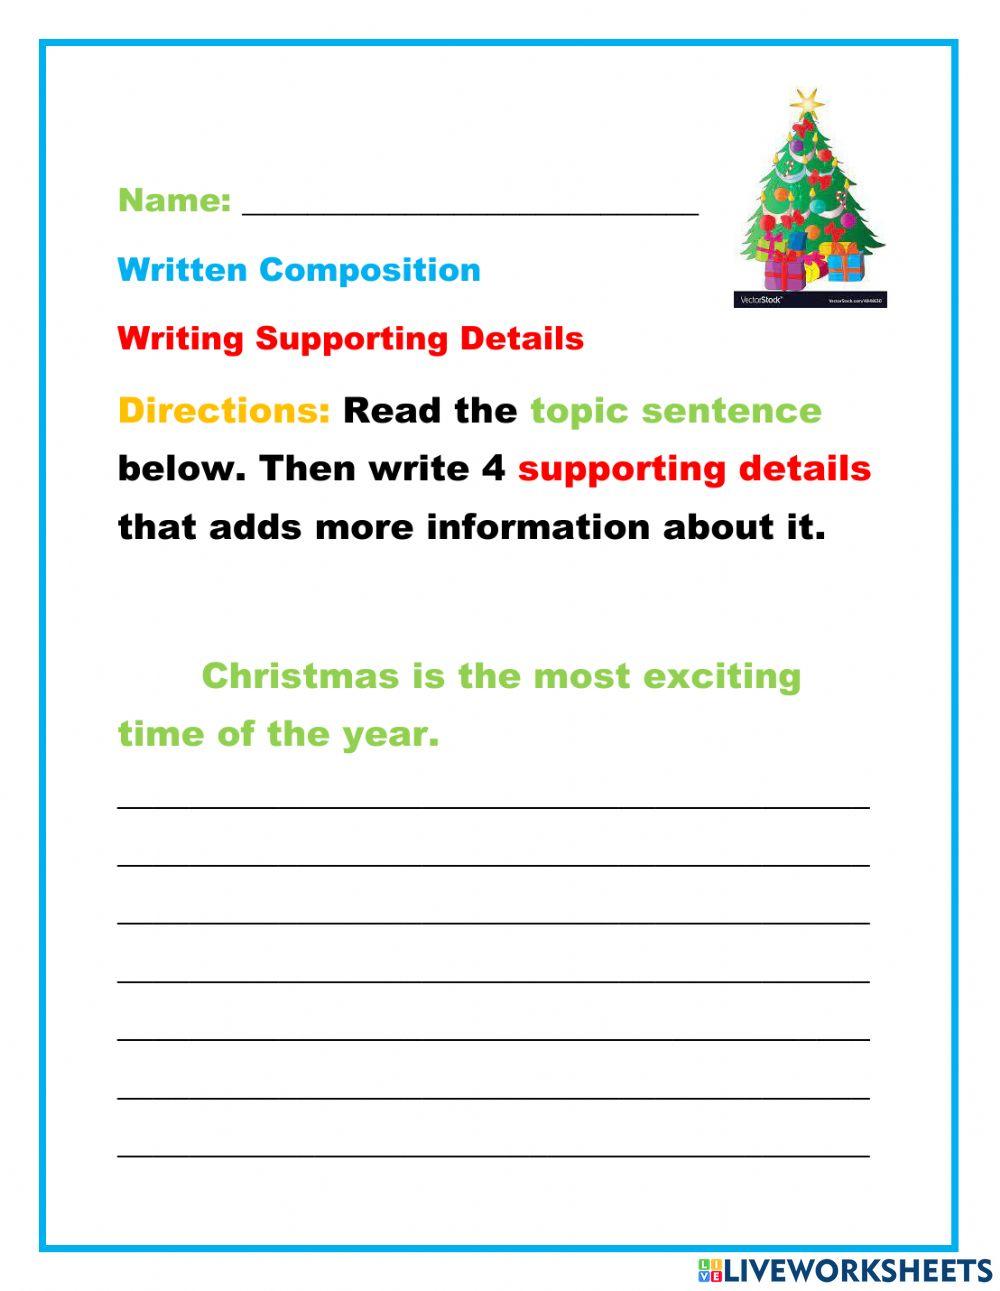 Writing Supporting Details